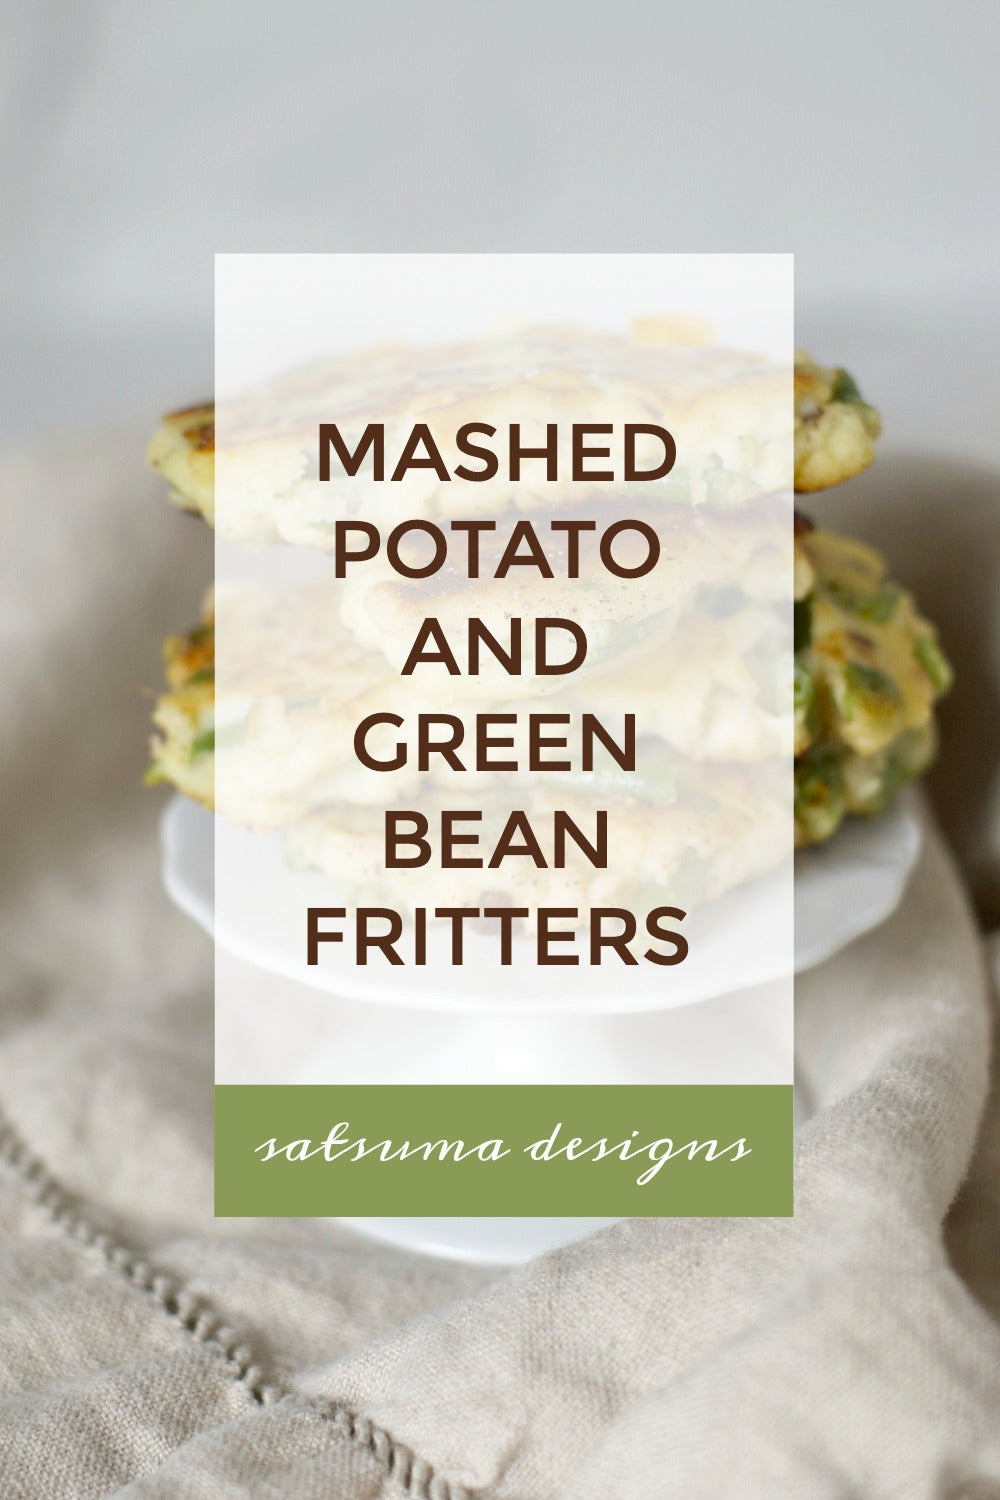 Mashed potato and green bean fritter recipe. This is a perfect solution to left over mashed potatoes and makes a delicious side dish or afternoon snack. Even pair these with a fried egg for a yummy breakfast! #fritters #recipes #mashedpotatos #greenbeans #dinnerrecipes